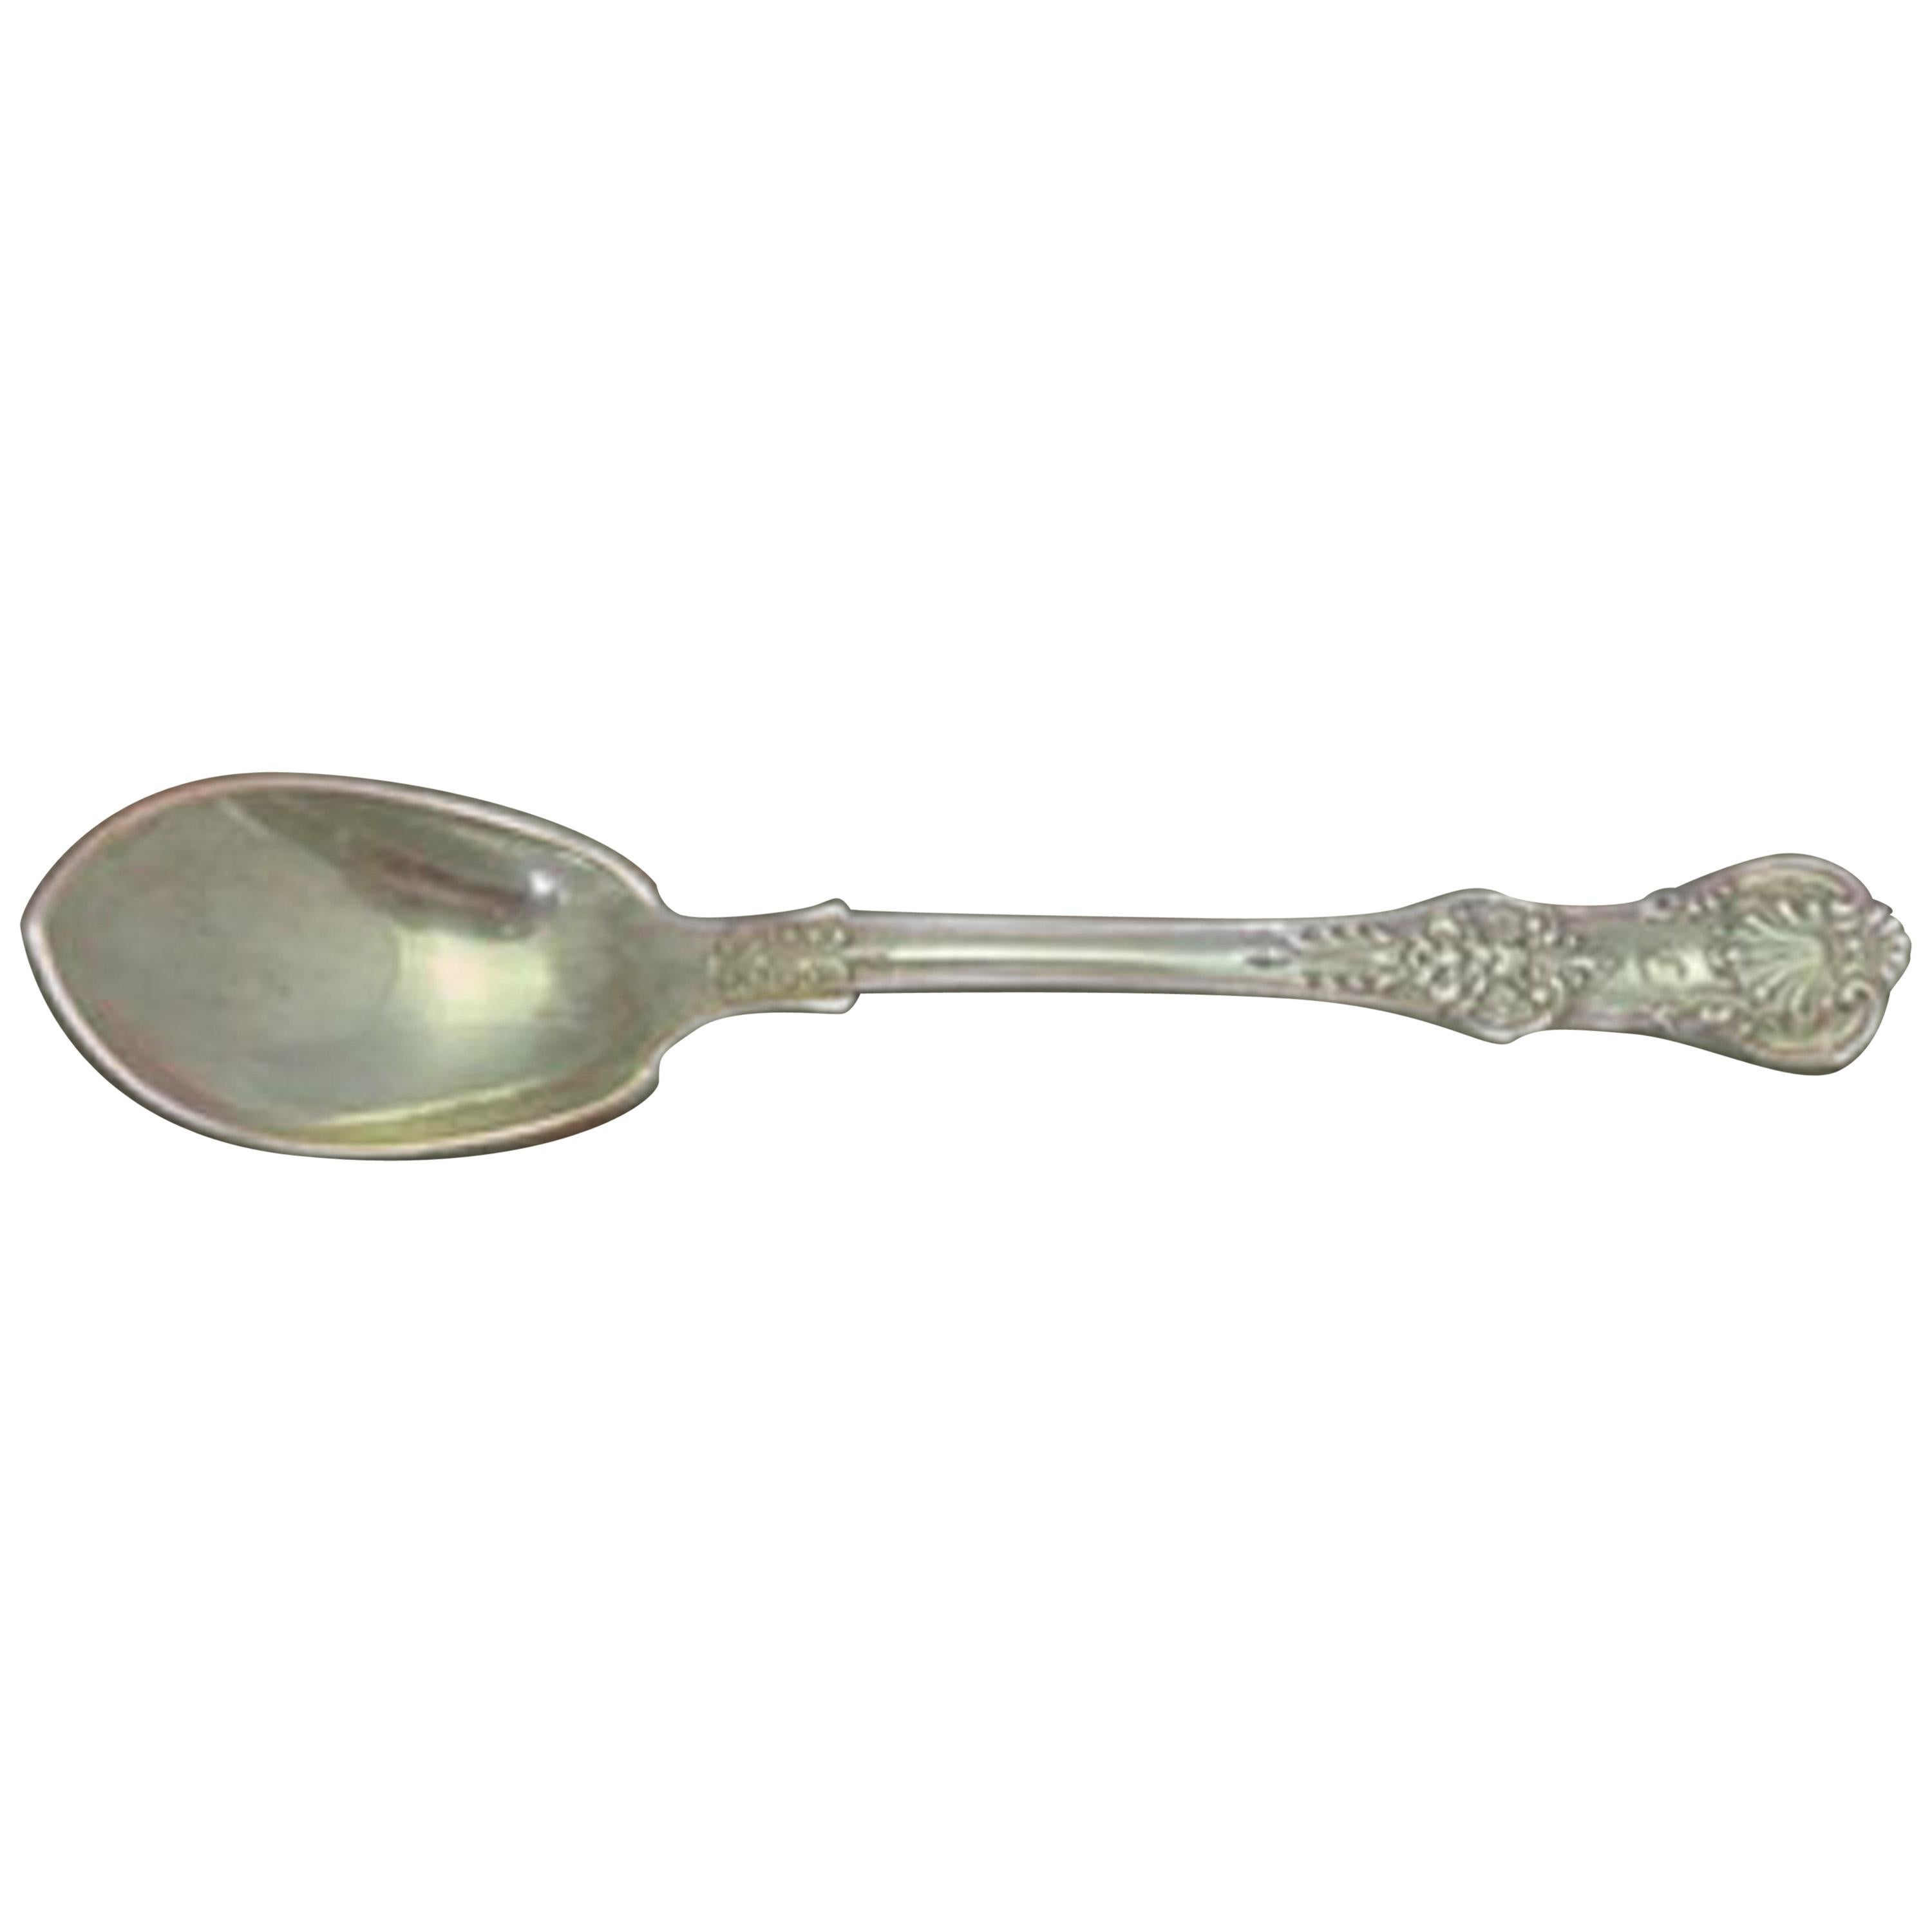 English King by Tiffany & Co. Sterling Silver Ice Cream Spoon